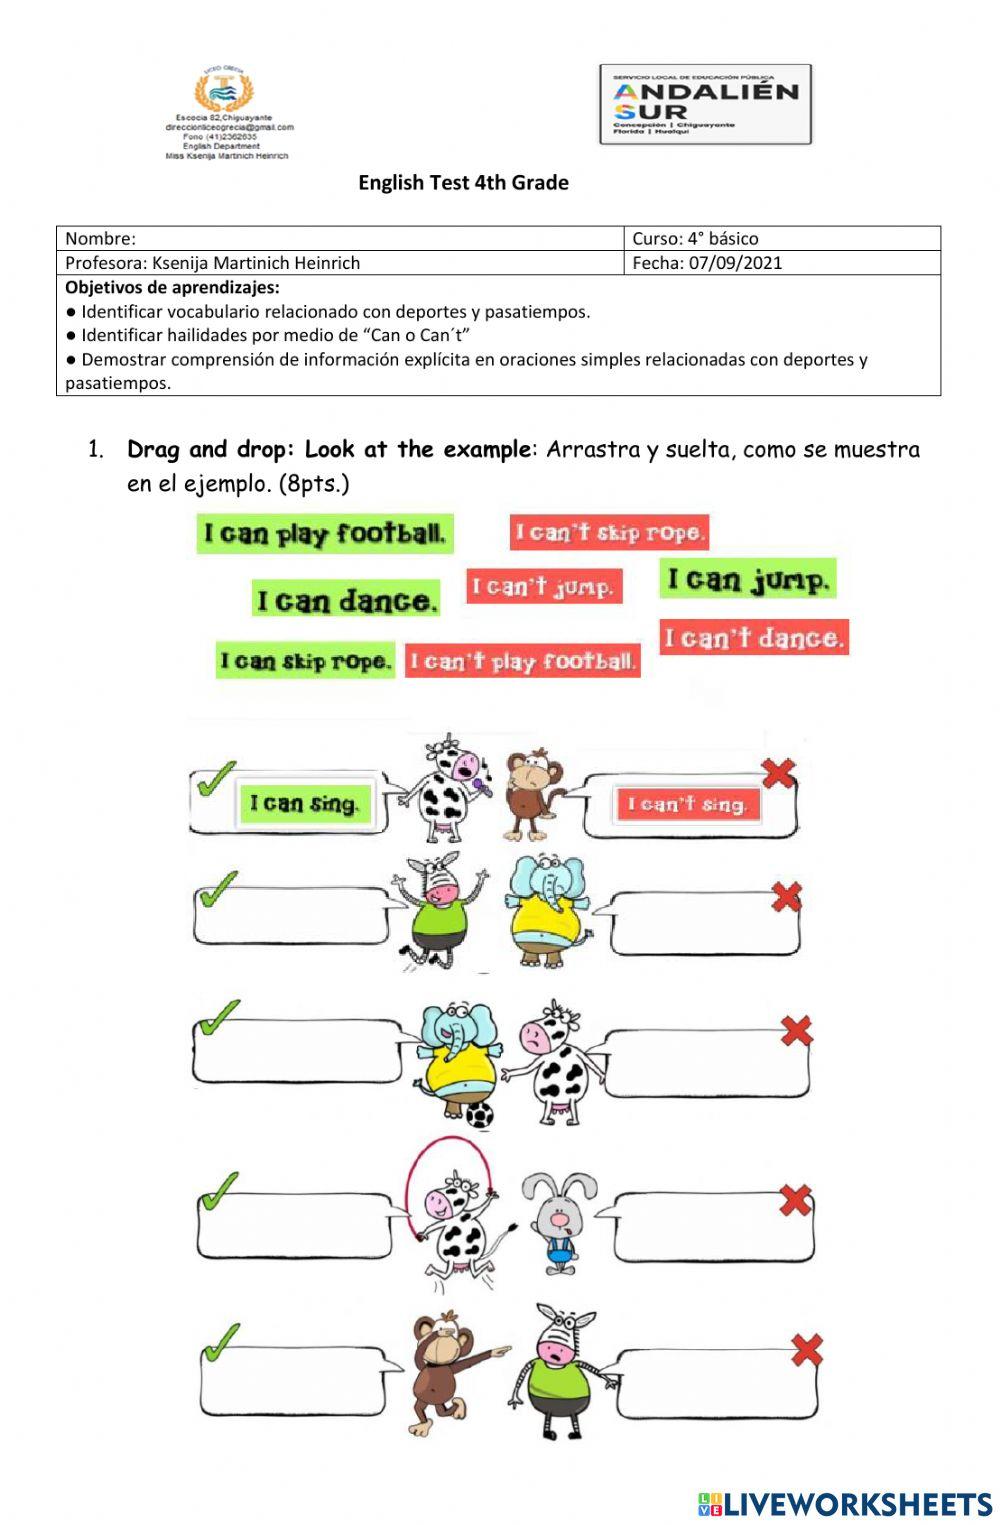 Test 4th grade Sports and Free time activities online exercise for | Live  Worksheets